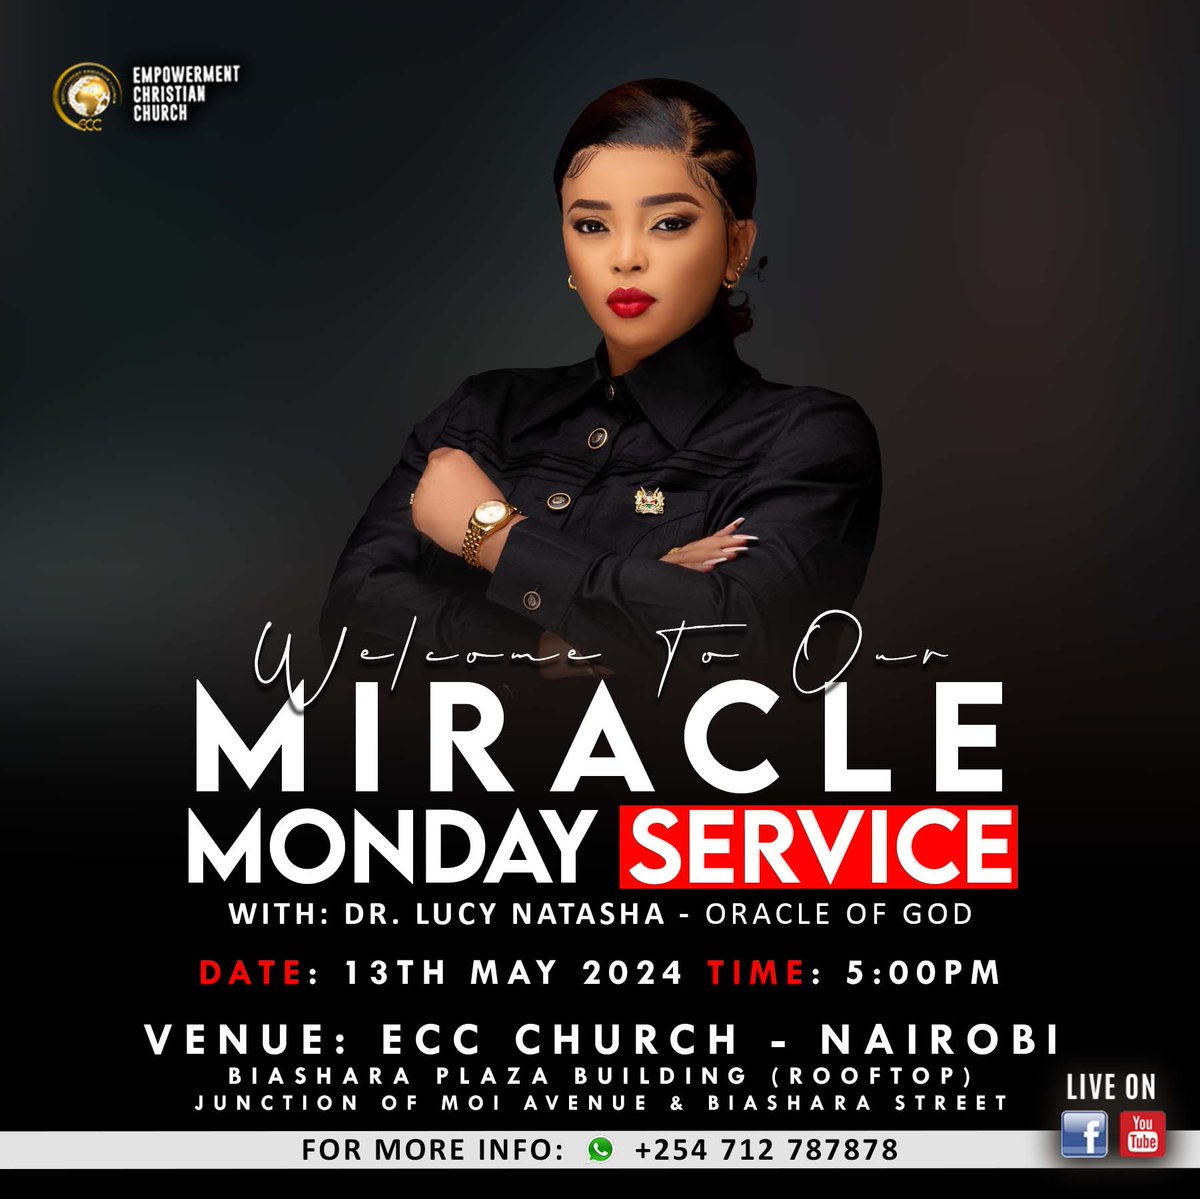 You are in your “Recover All” era. This is the season you take back what the devil stole and get back strong in your faith, your health, your joy and your destiny IN JESUS’ NAME! 📖 Joel 2:25 📖 Jeremiah 29:11 Welcome For Our Miracle Monday Service Empowerment Christian Church…